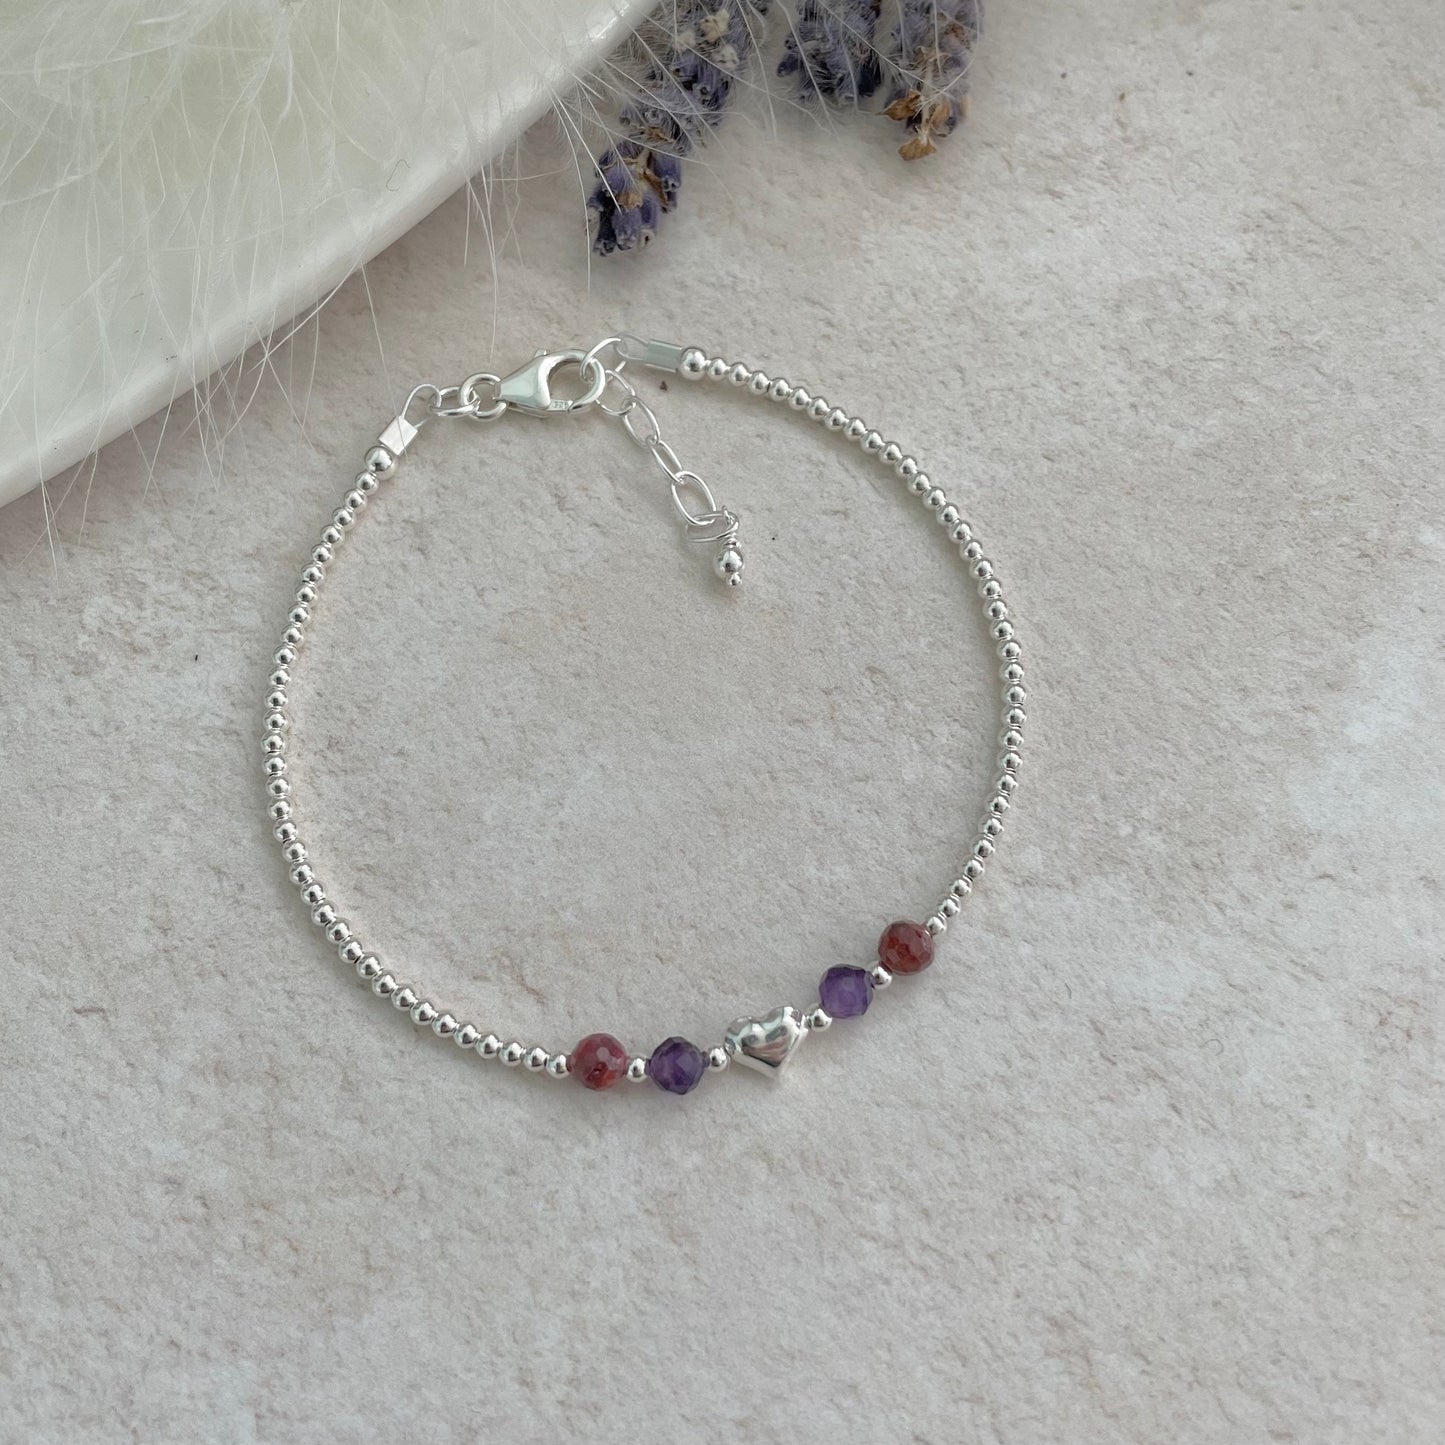 Personalised Family Birthstones Bracelet in Silver, Family Jewelry nft